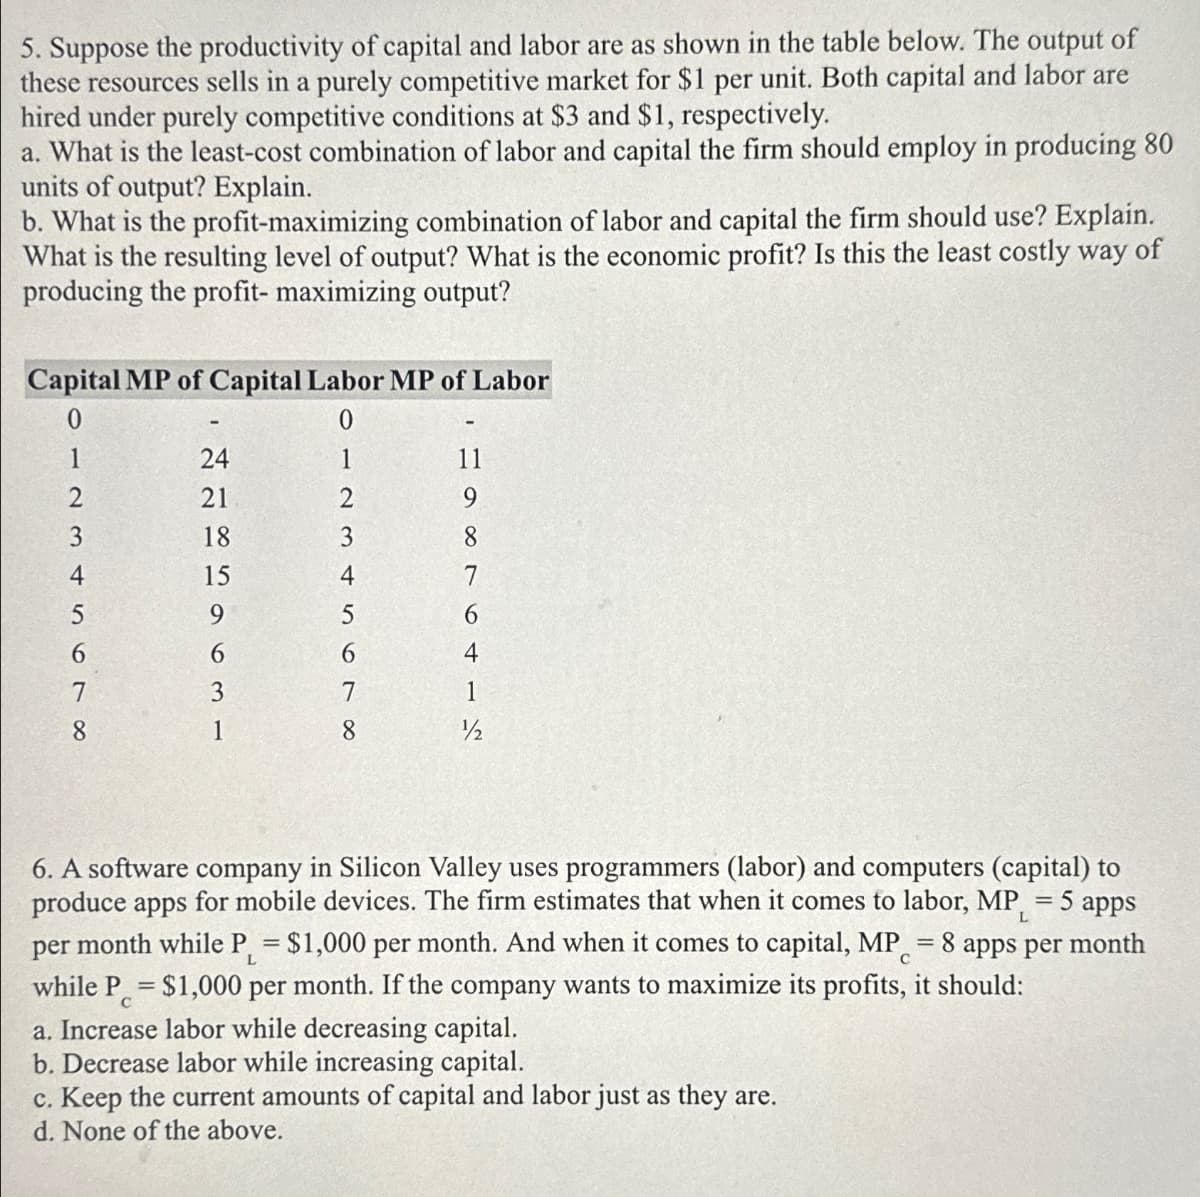 5. Suppose the productivity of capital and labor are as shown in the table below. The output of
these resources sells in a purely competitive market for $1 per unit. Both capital and labor are
hired under purely competitive conditions at $3 and $1, respectively.
a. What is the least-cost combination of labor and capital the firm should employ in producing 80
units of output? Explain.
b. What is the profit-maximizing combination of labor and capital the firm should use? Explain.
What is the resulting level of output? What is the economic profit? Is this the least costly way of
producing the profit- maximizing output?
Capital MP of Capital Labor MP of Labor
0
24
1
11
21
2
9
18
3
15
4
5
6
8464
7
2265963-
012345678
7
1
1
8
1/2
L
6. A software company in Silicon Valley uses programmers (labor) and computers (capital) to
produce apps for mobile devices. The firm estimates that when it comes to labor, MP₁ = 5 apps
per month while P₁ = $1,000 per month. And when it comes to capital, MP = 8 apps per month
while P = $1,000 per month. If the company wants to maximize its profits, it should:
C
L
a. Increase labor while decreasing capital.
b. Decrease labor while increasing capital.
c. Keep the current amounts of capital and labor just as they are.
d. None of the above.